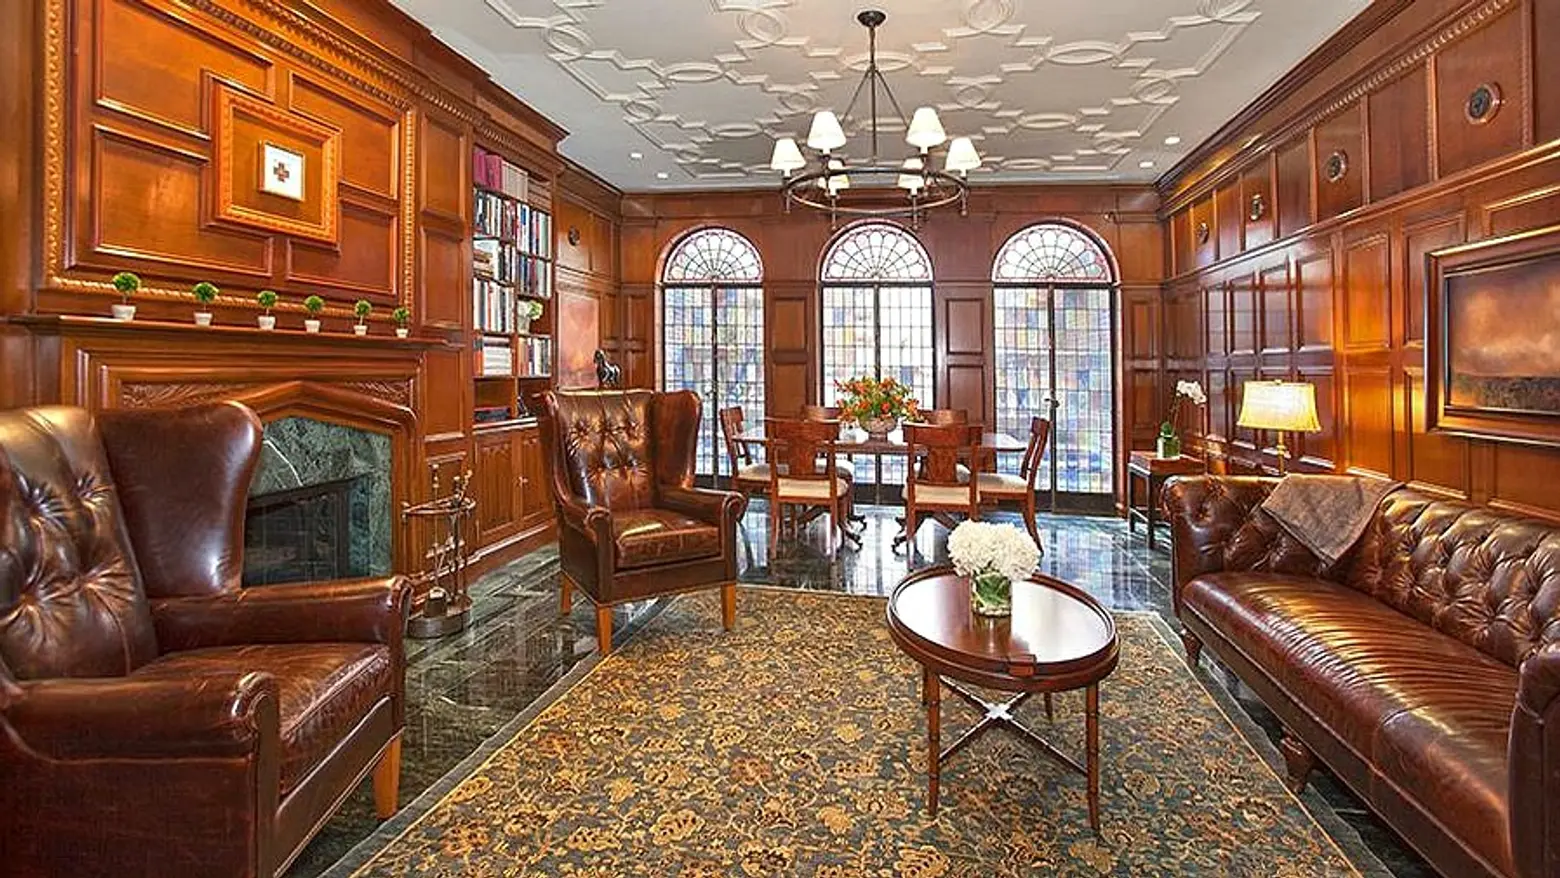 Live in Eleanor Roosevelt’s Historic Townhouse for $18M